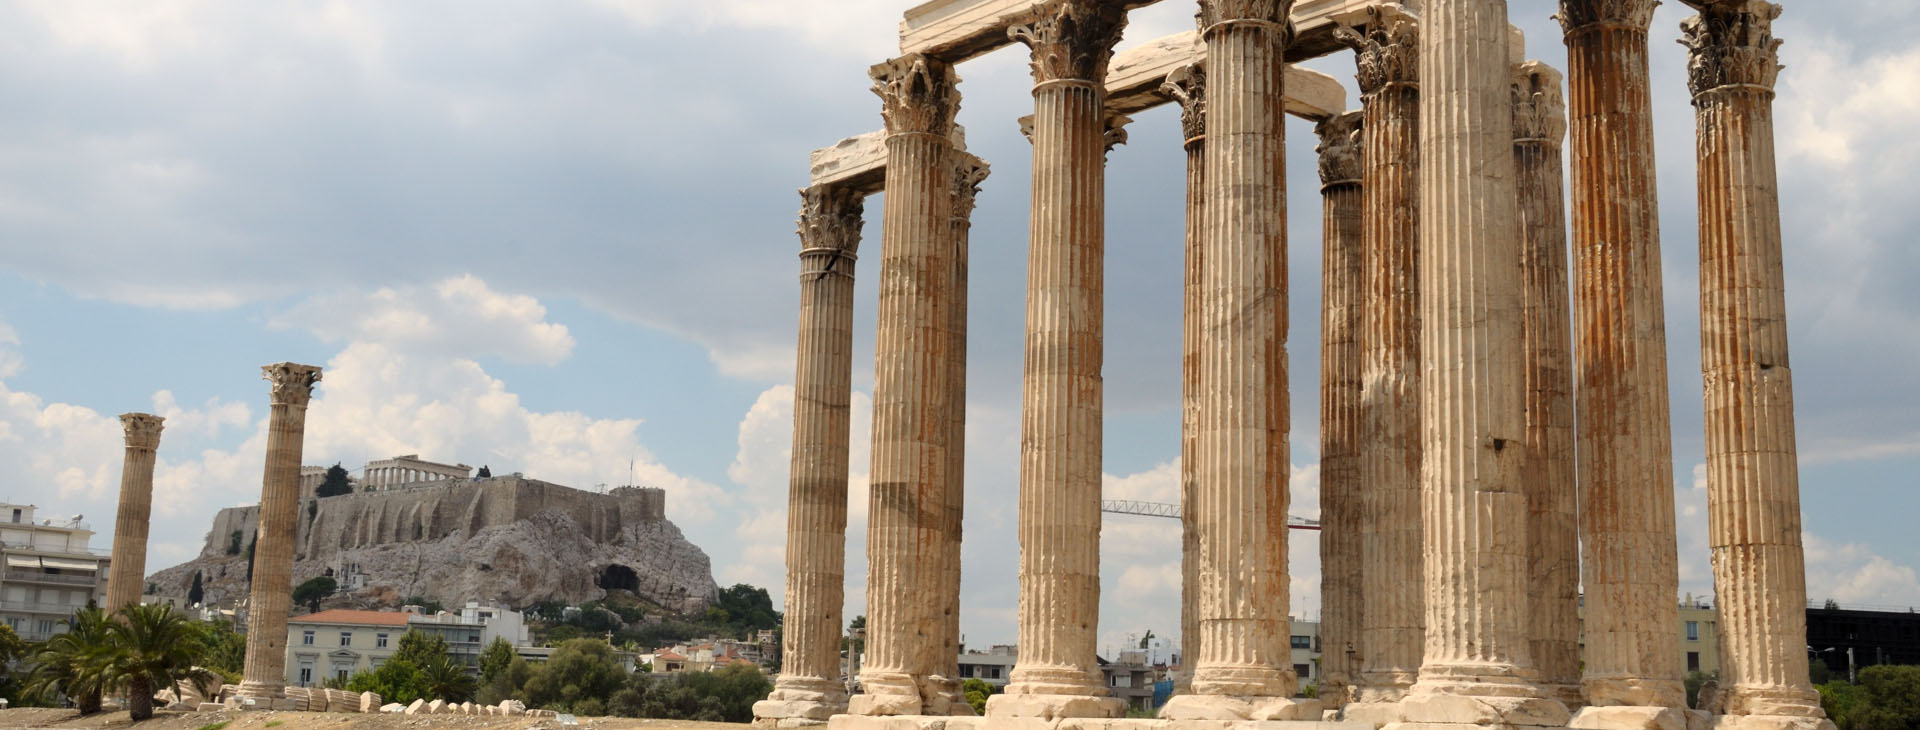 Temple of Olympian Zeus and Acropolis, Athens